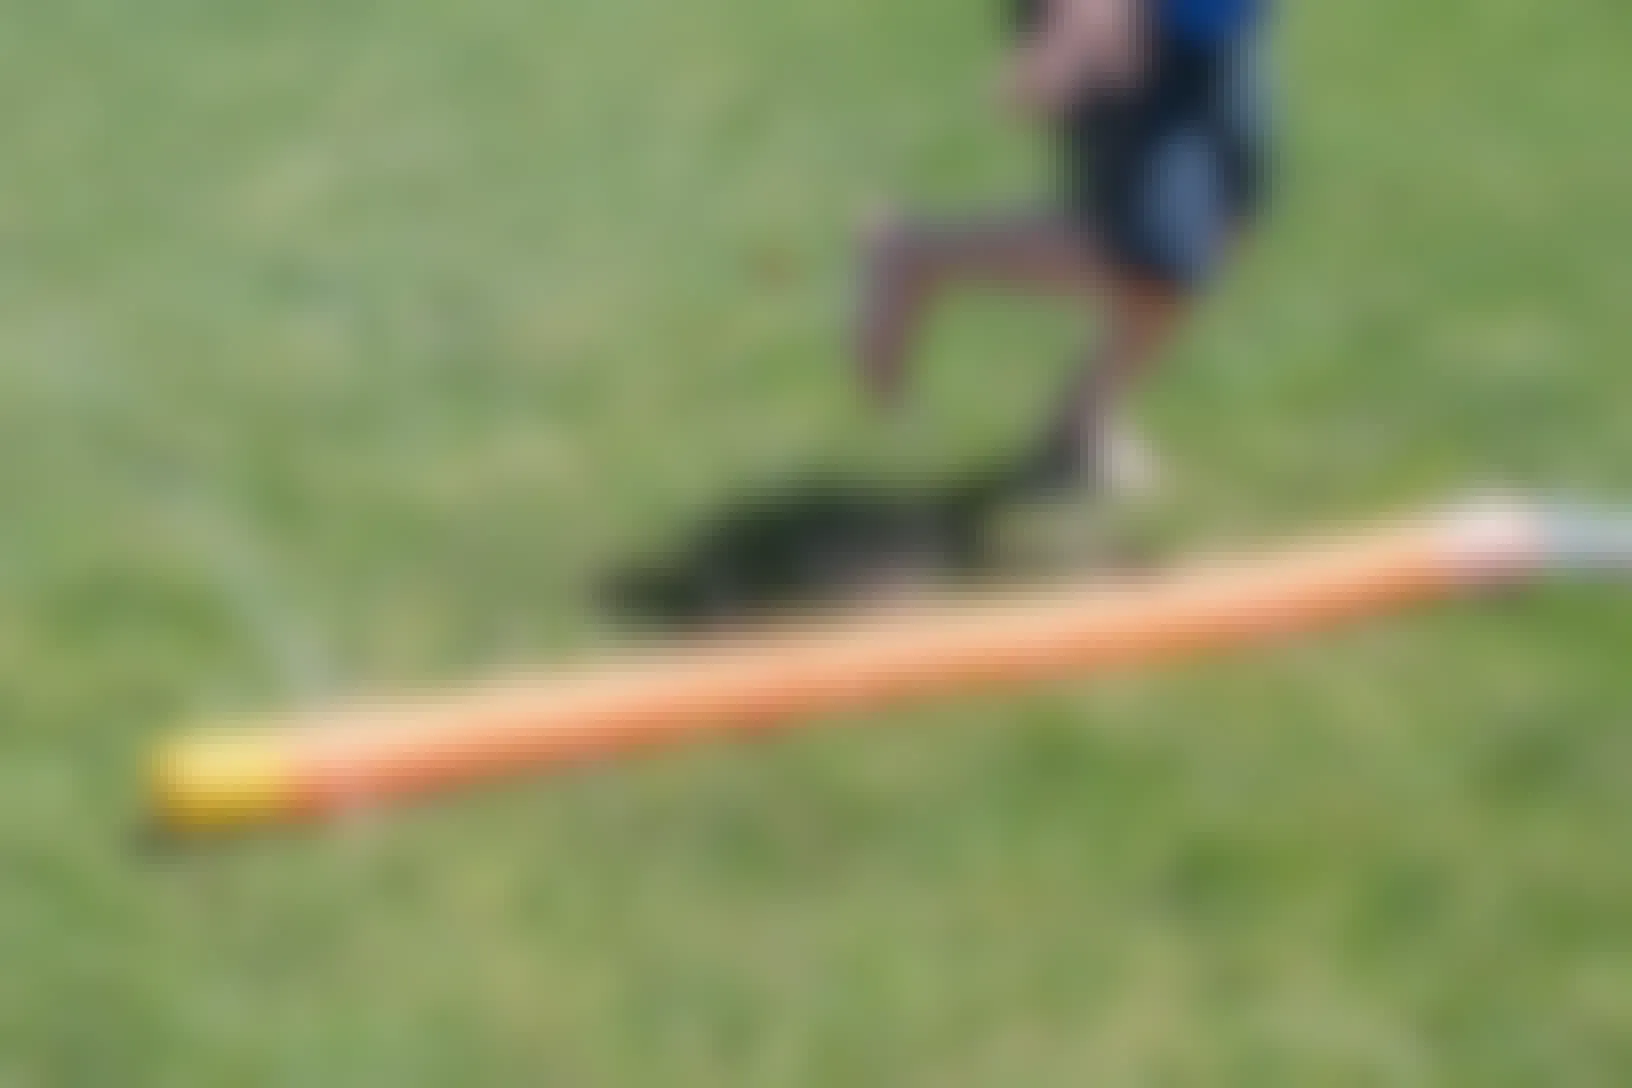 A child playing around a DIY pool noodle sprinkler that is attached to a hose on a lawn.